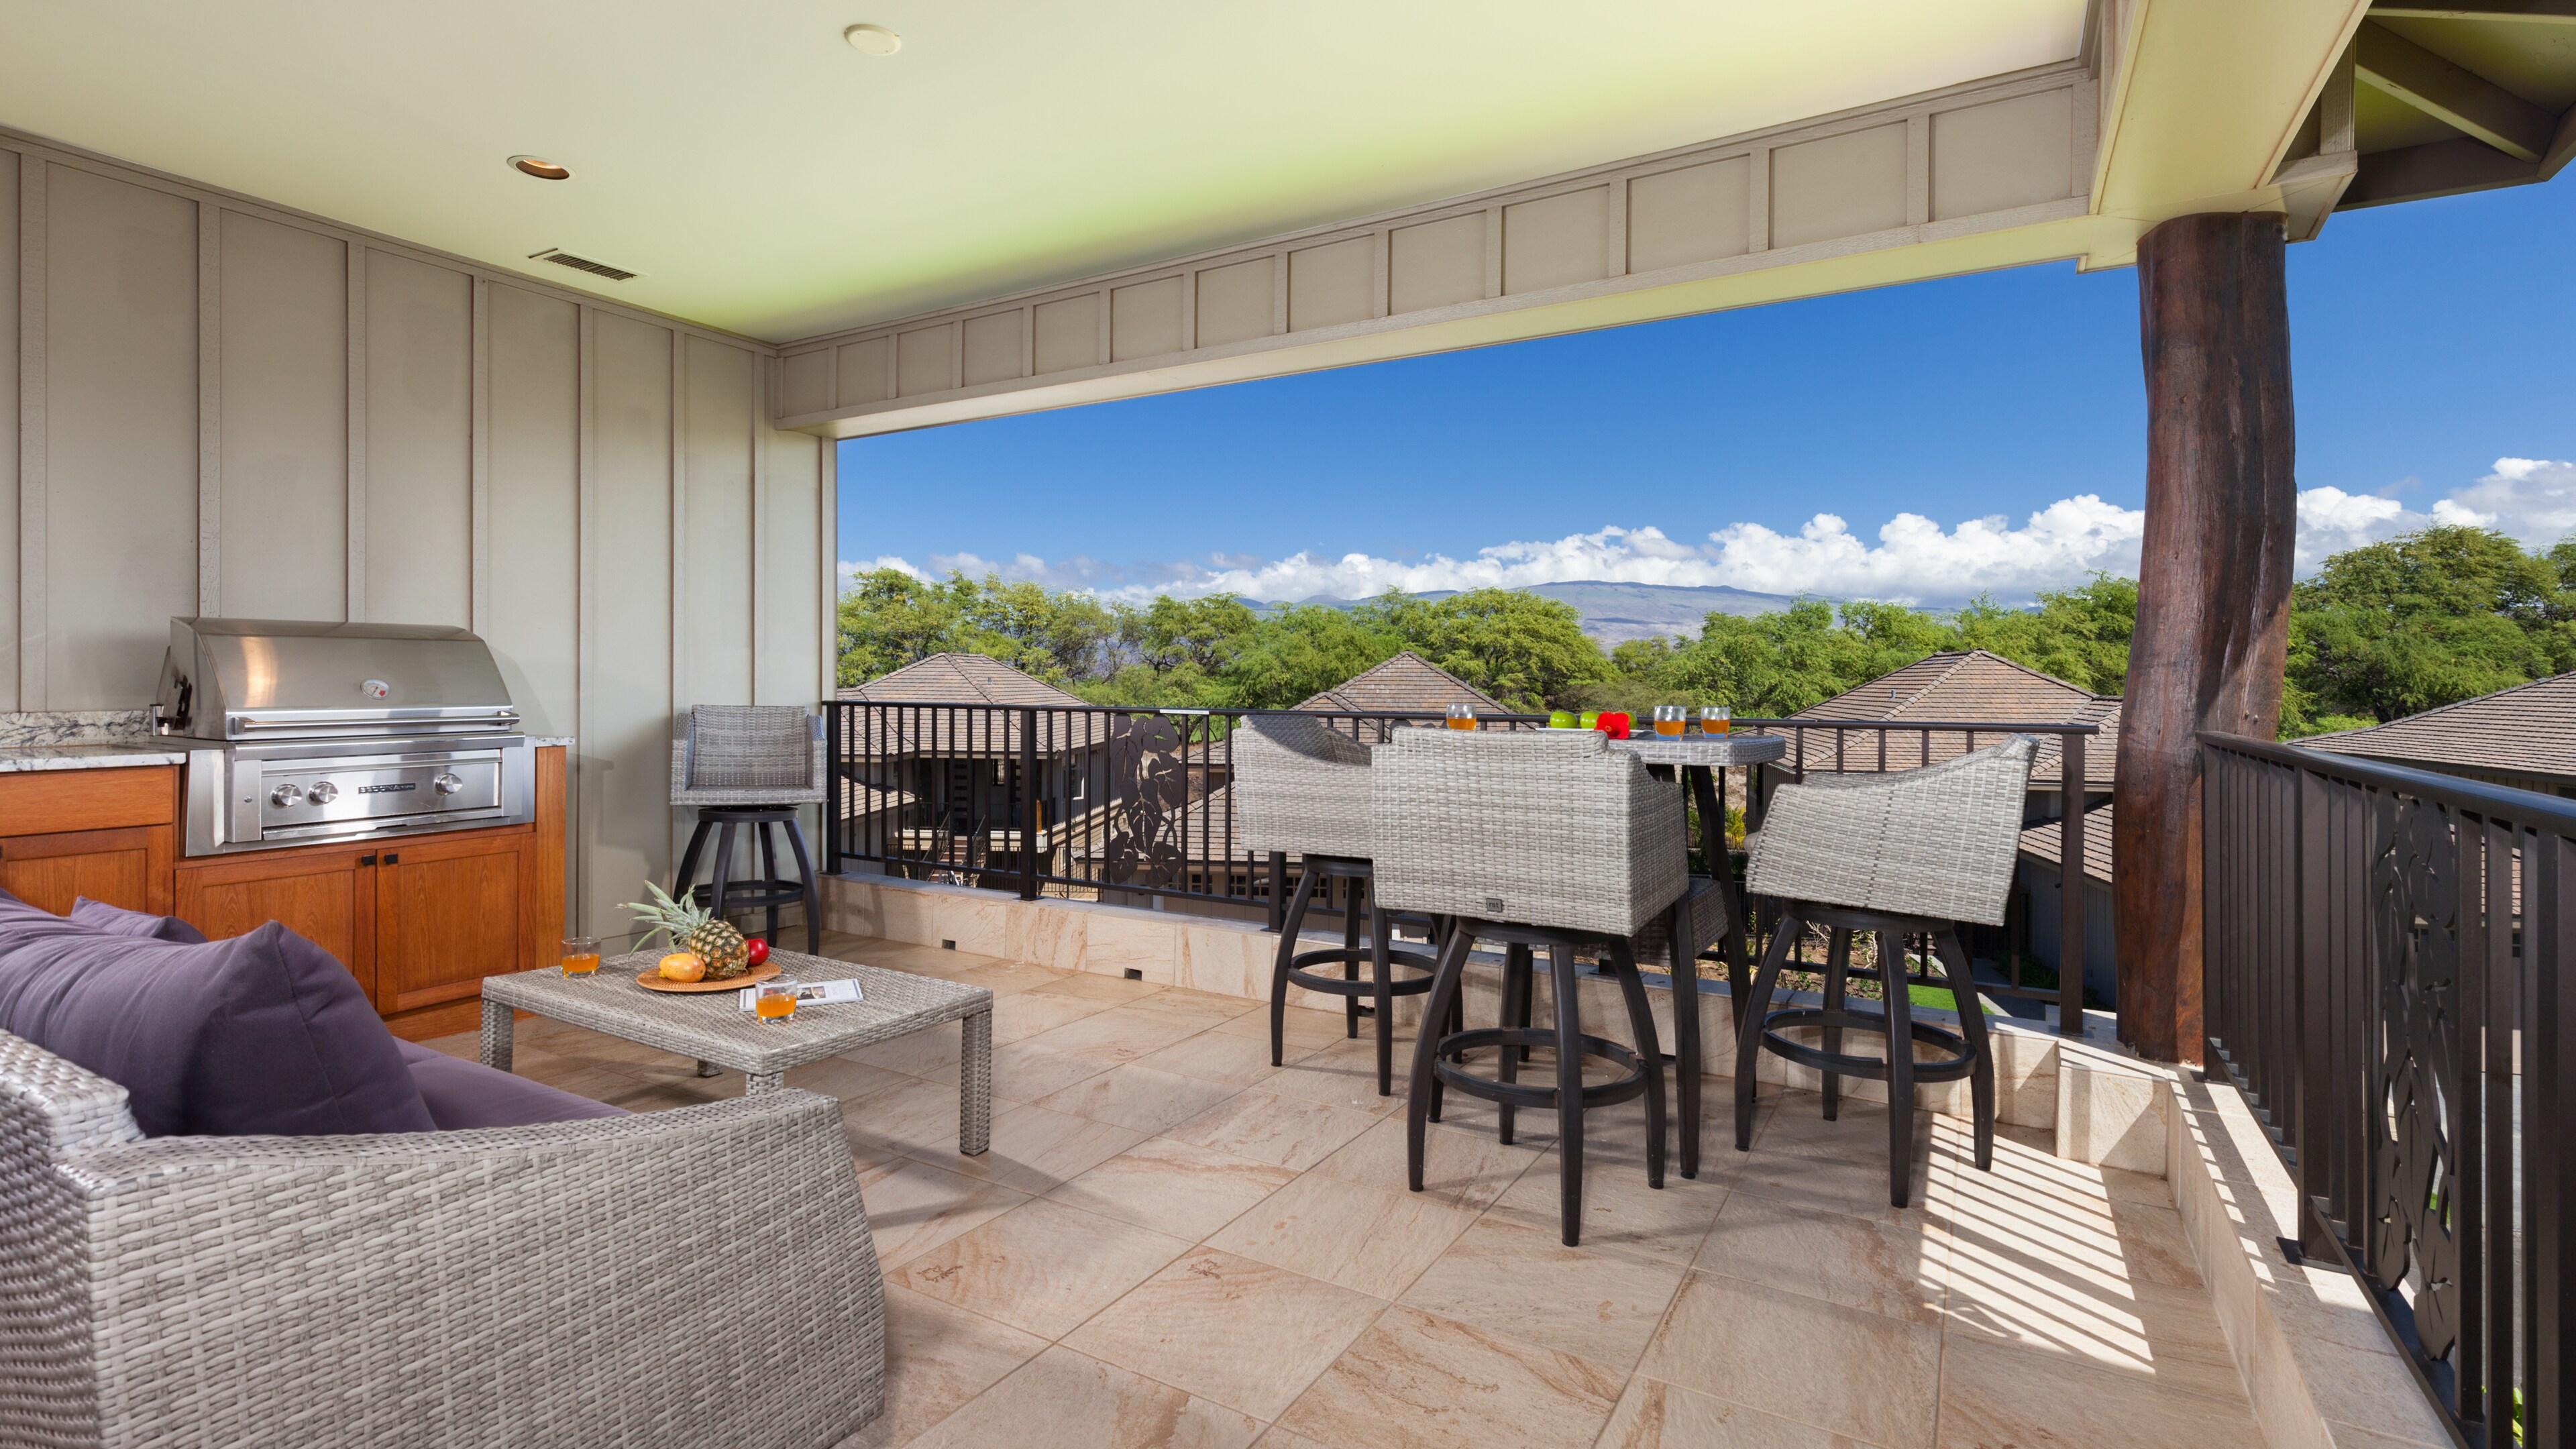 Welcome to Hawaiian Bliss in the beautiful KaMilo community at the Mauna Lani resort - Outdoor living on covered lanai with private grill